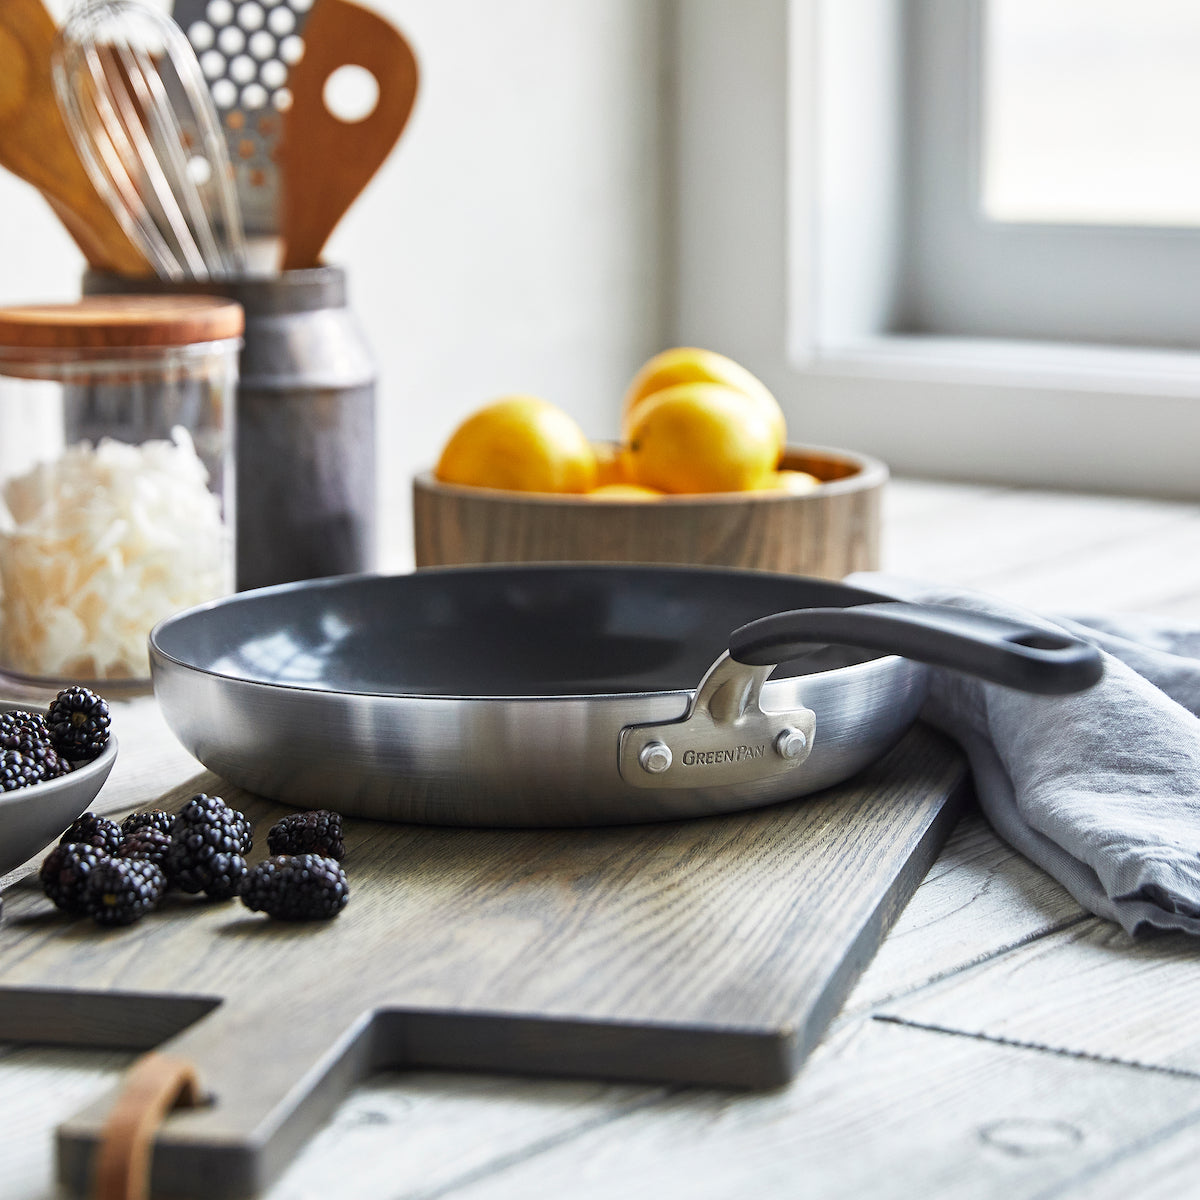 6 Reasons to Start Cooking With Ceramic